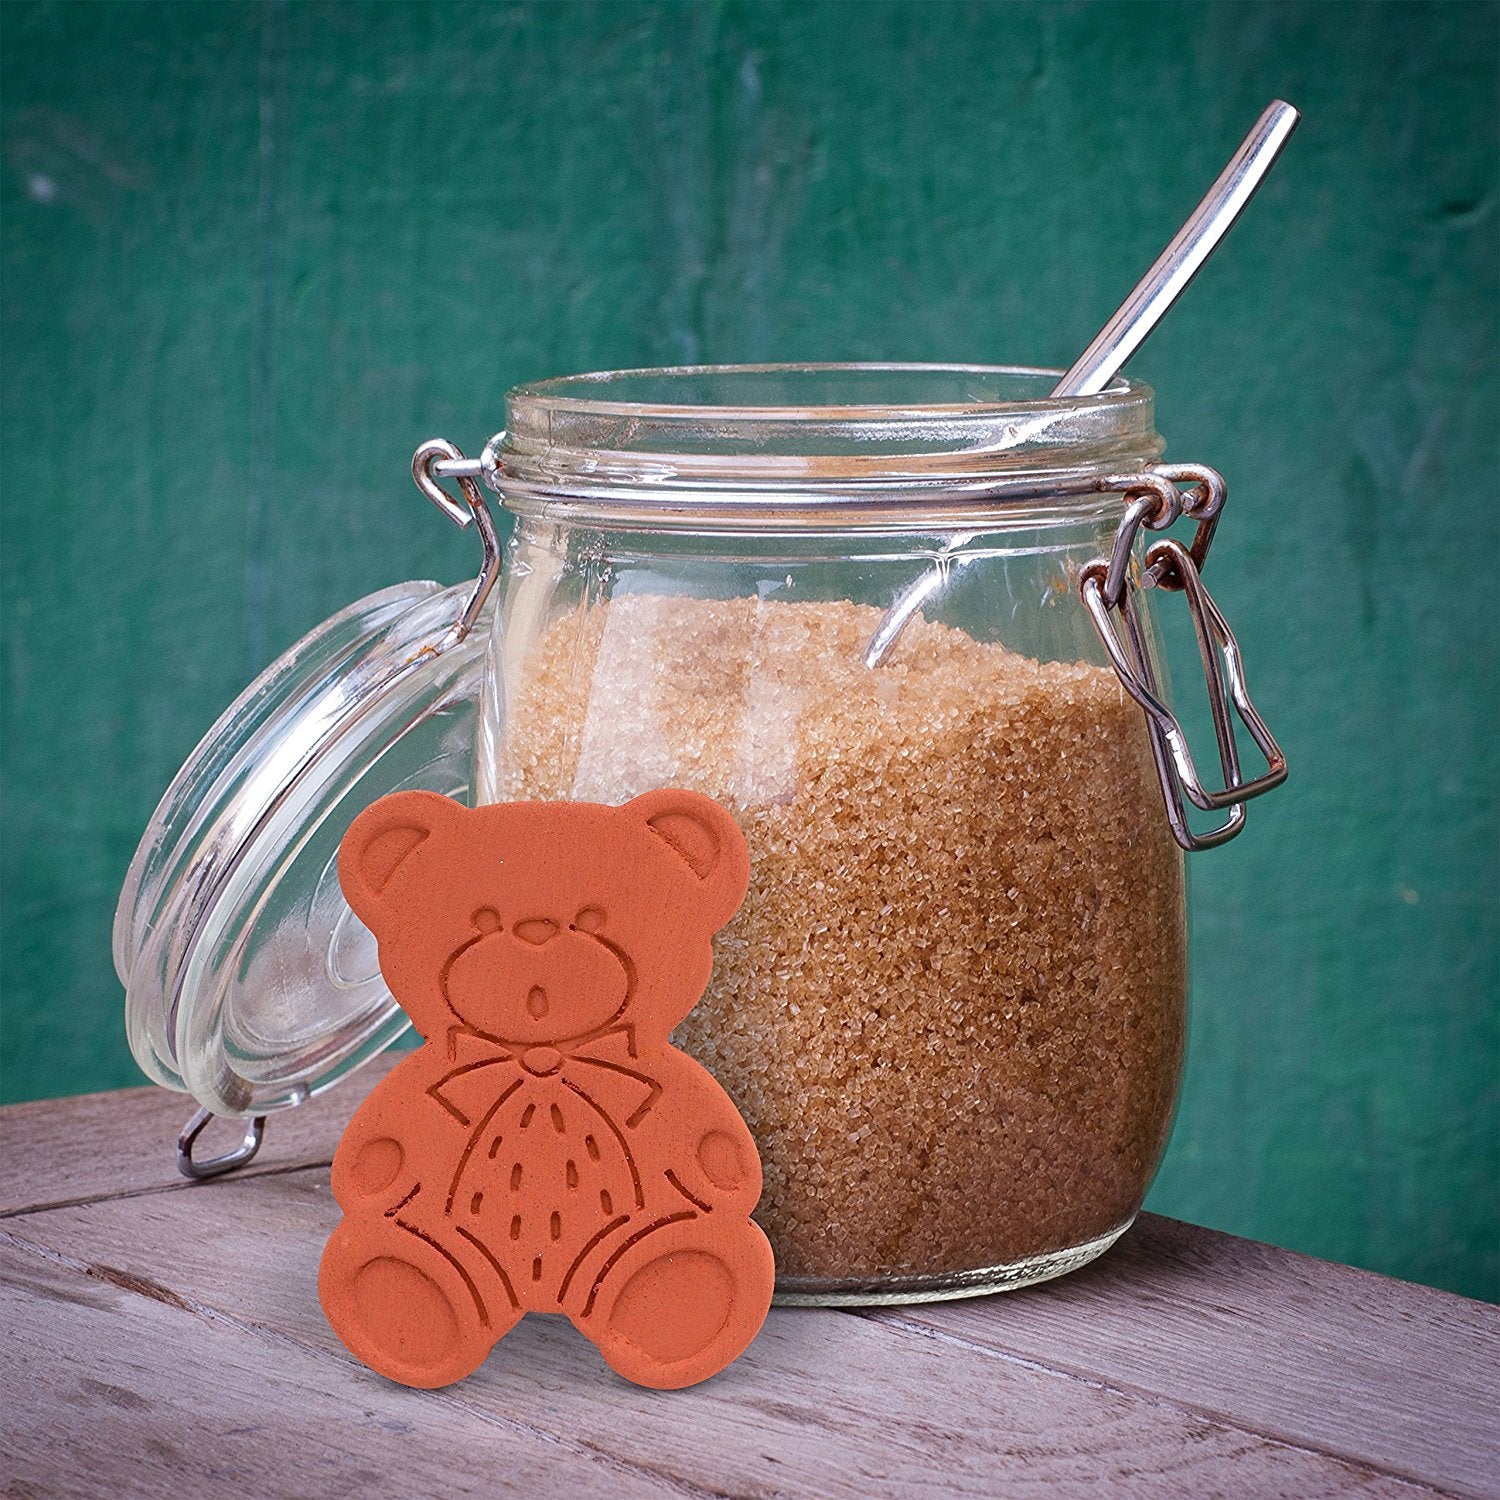 A brown sugar saver bear is sitting in front of a large jar of brown sugar.